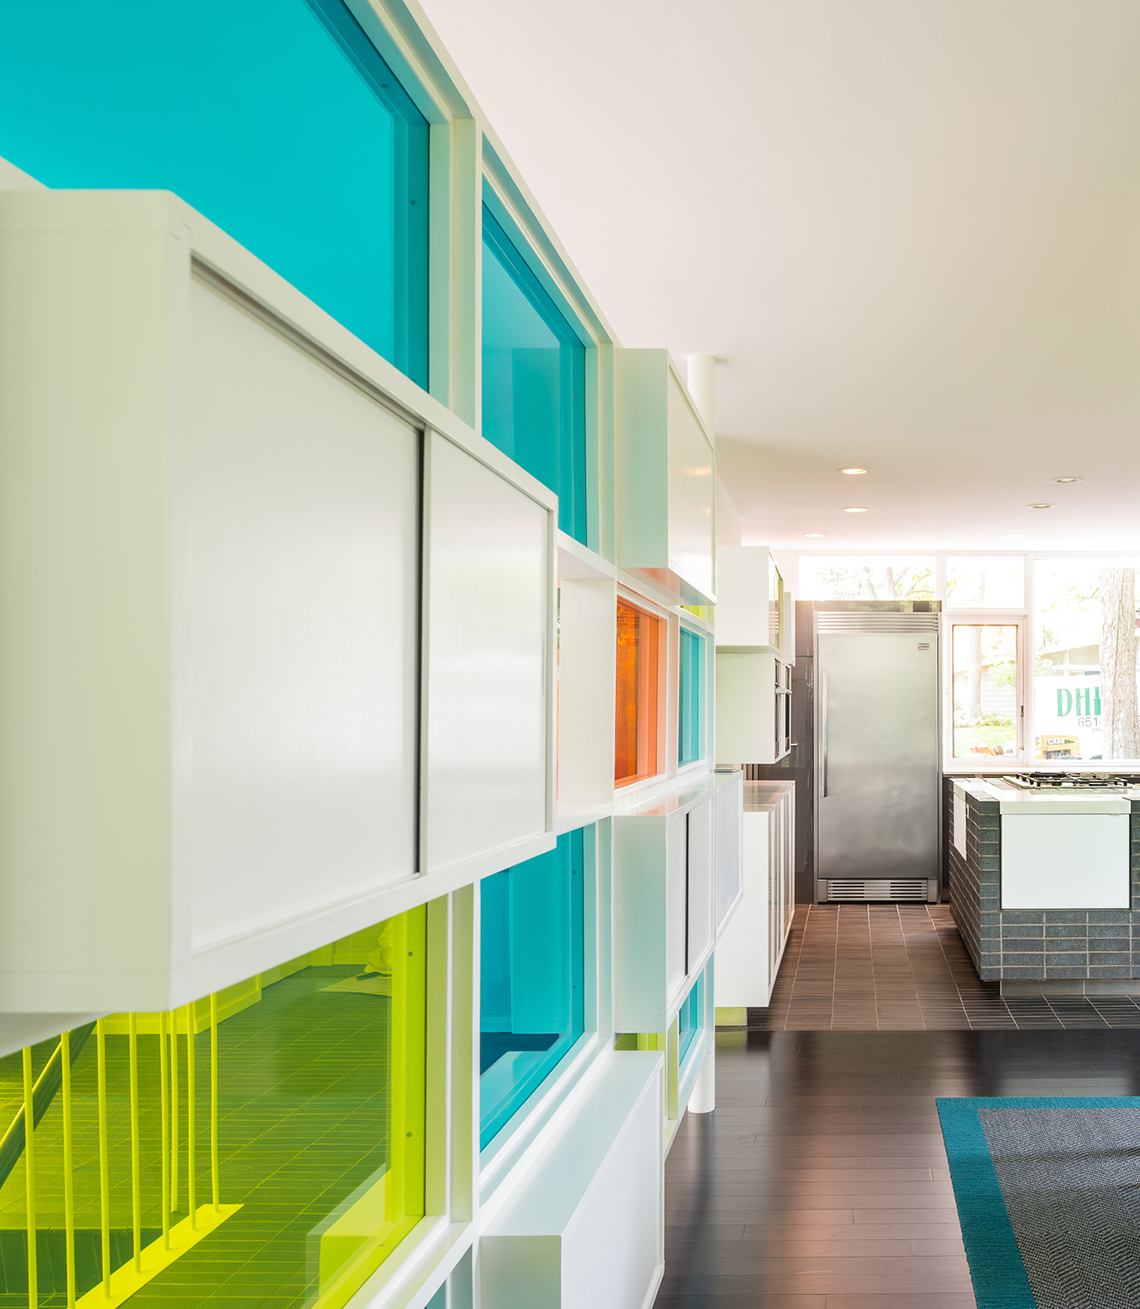 Detail of colorful midcentury divider wall